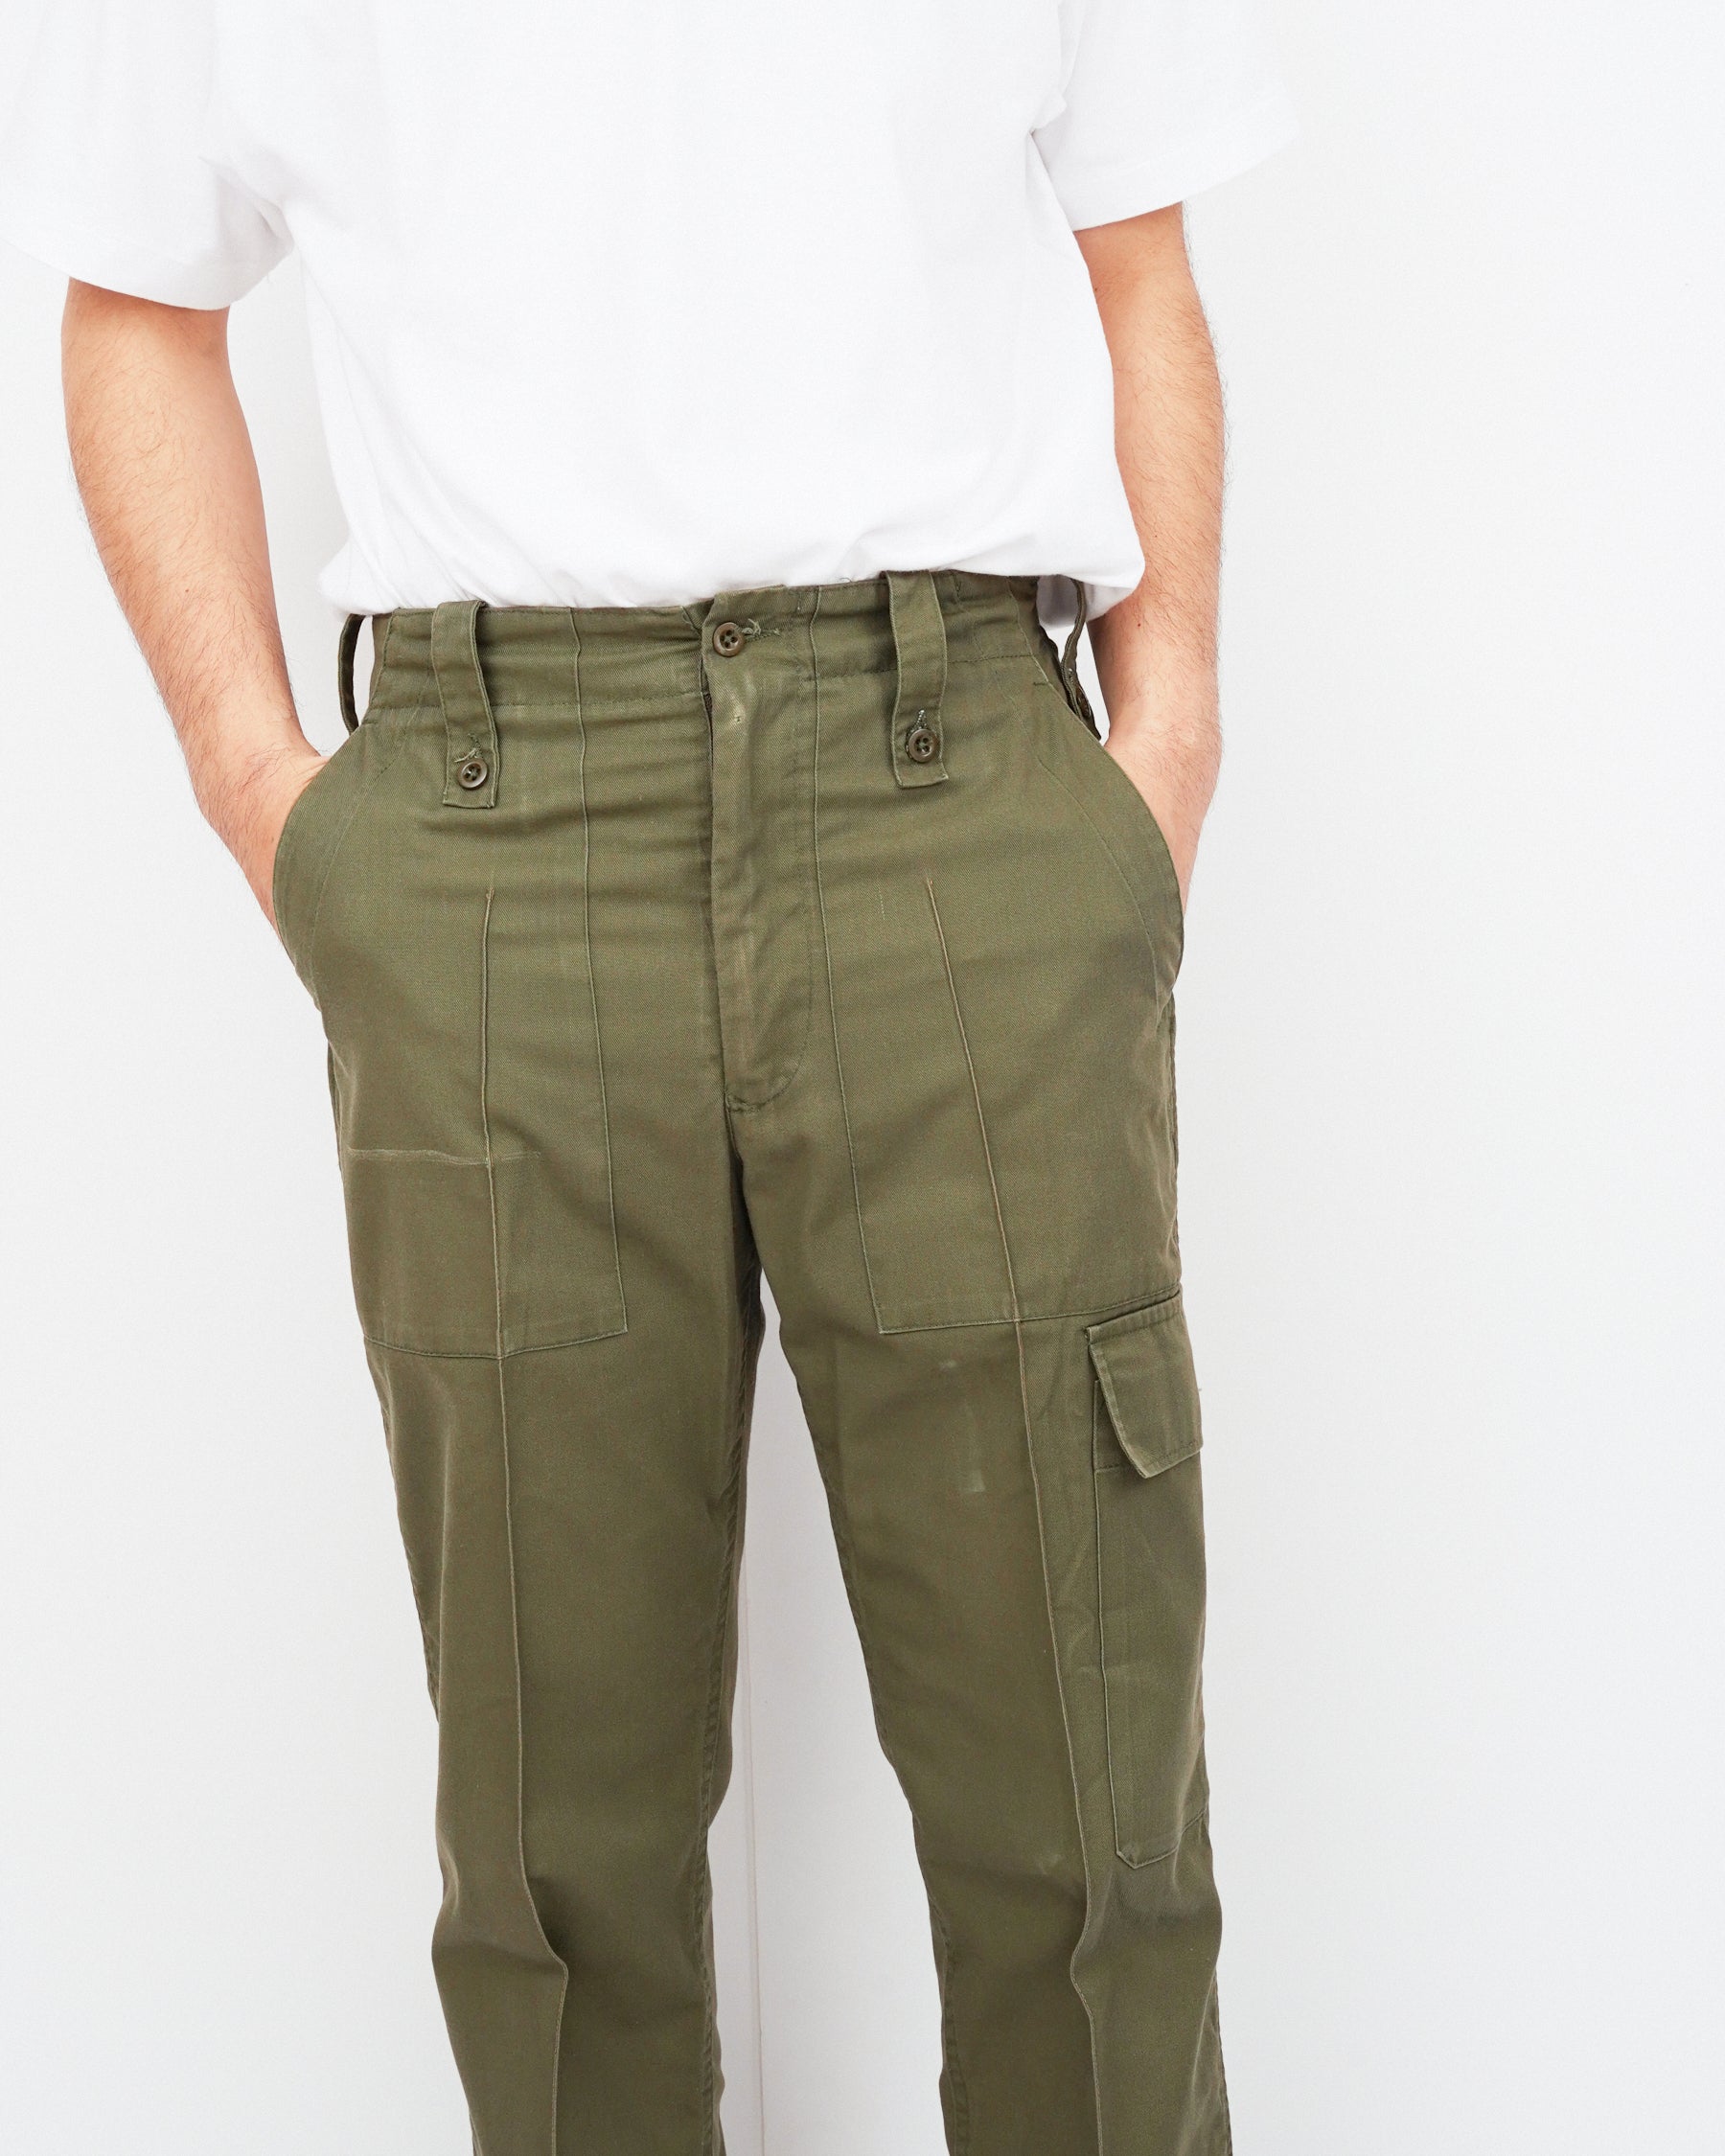 British Military Fatigue Trousers